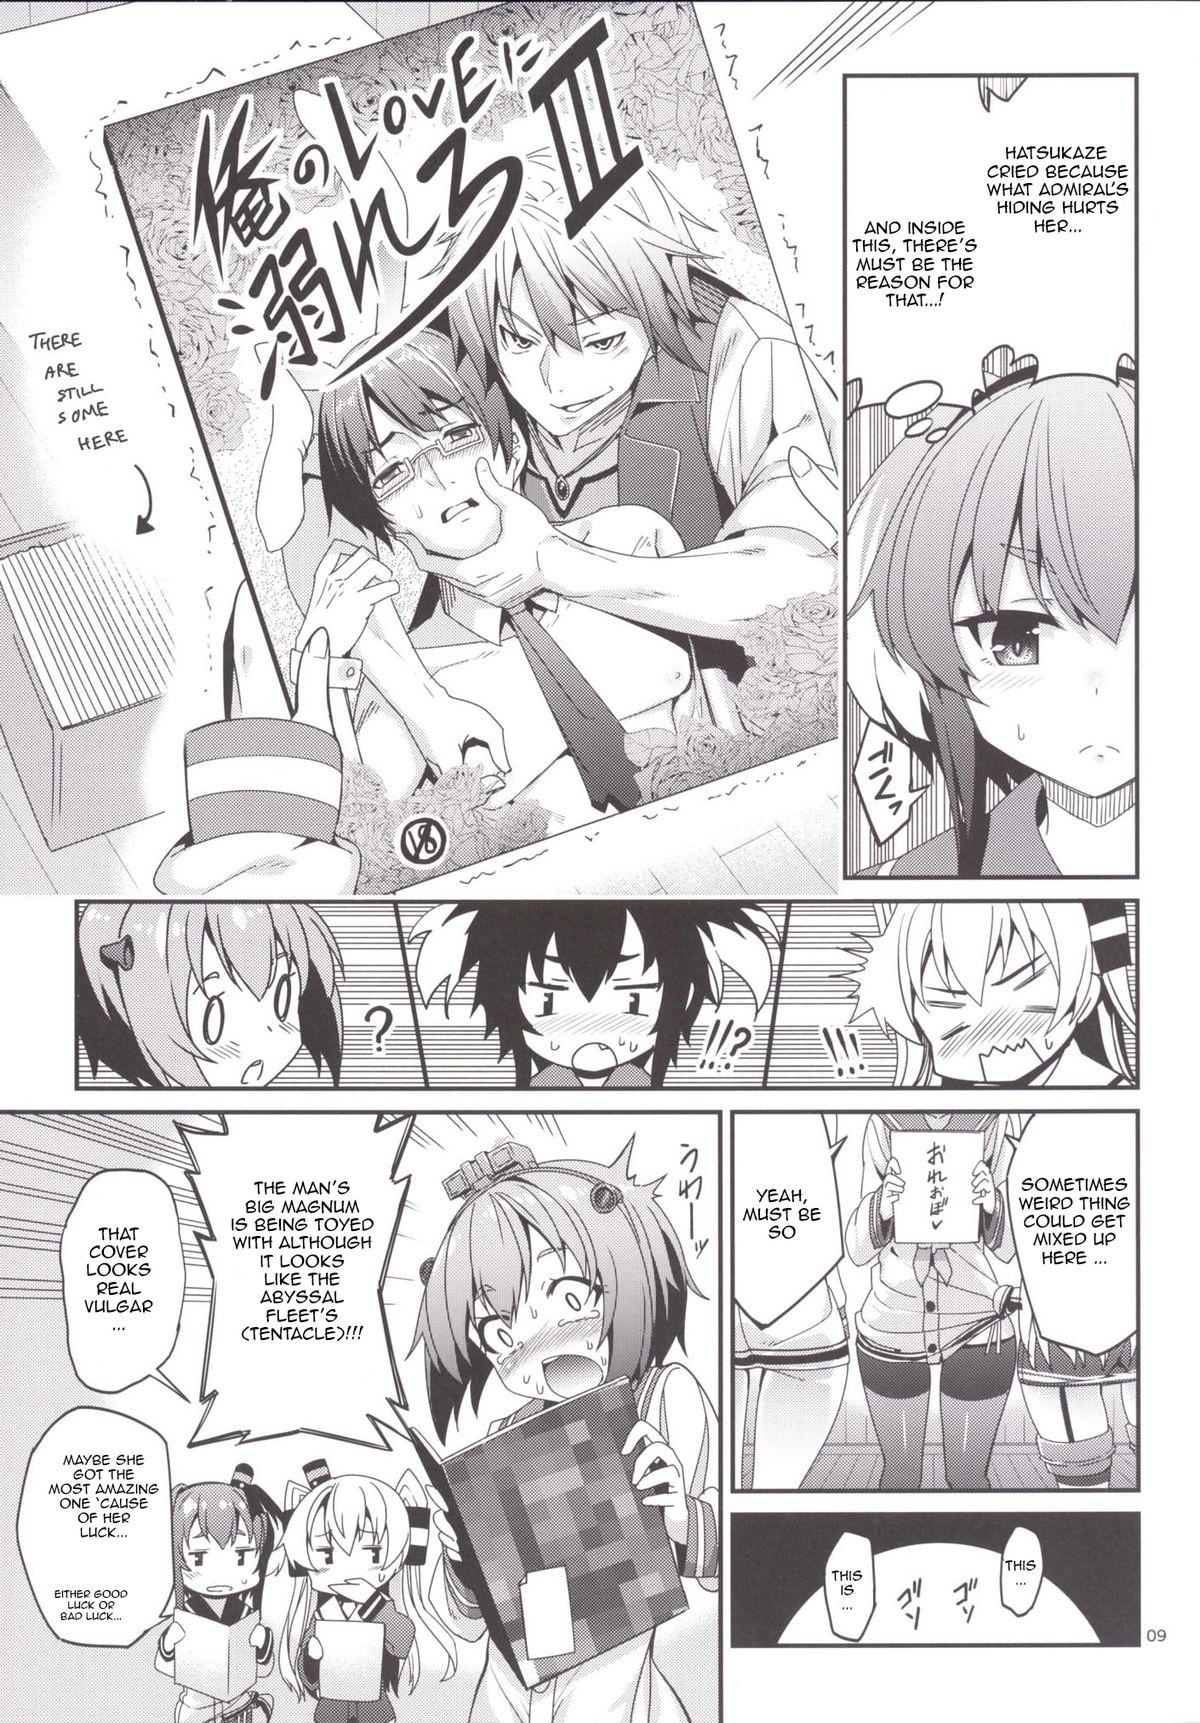 Cutie Shire! Mayonaka ni Nani Shitenno? | Admiral! What're You Doing in The Middle of Night? - Kantai collection Sexcam - Page 8